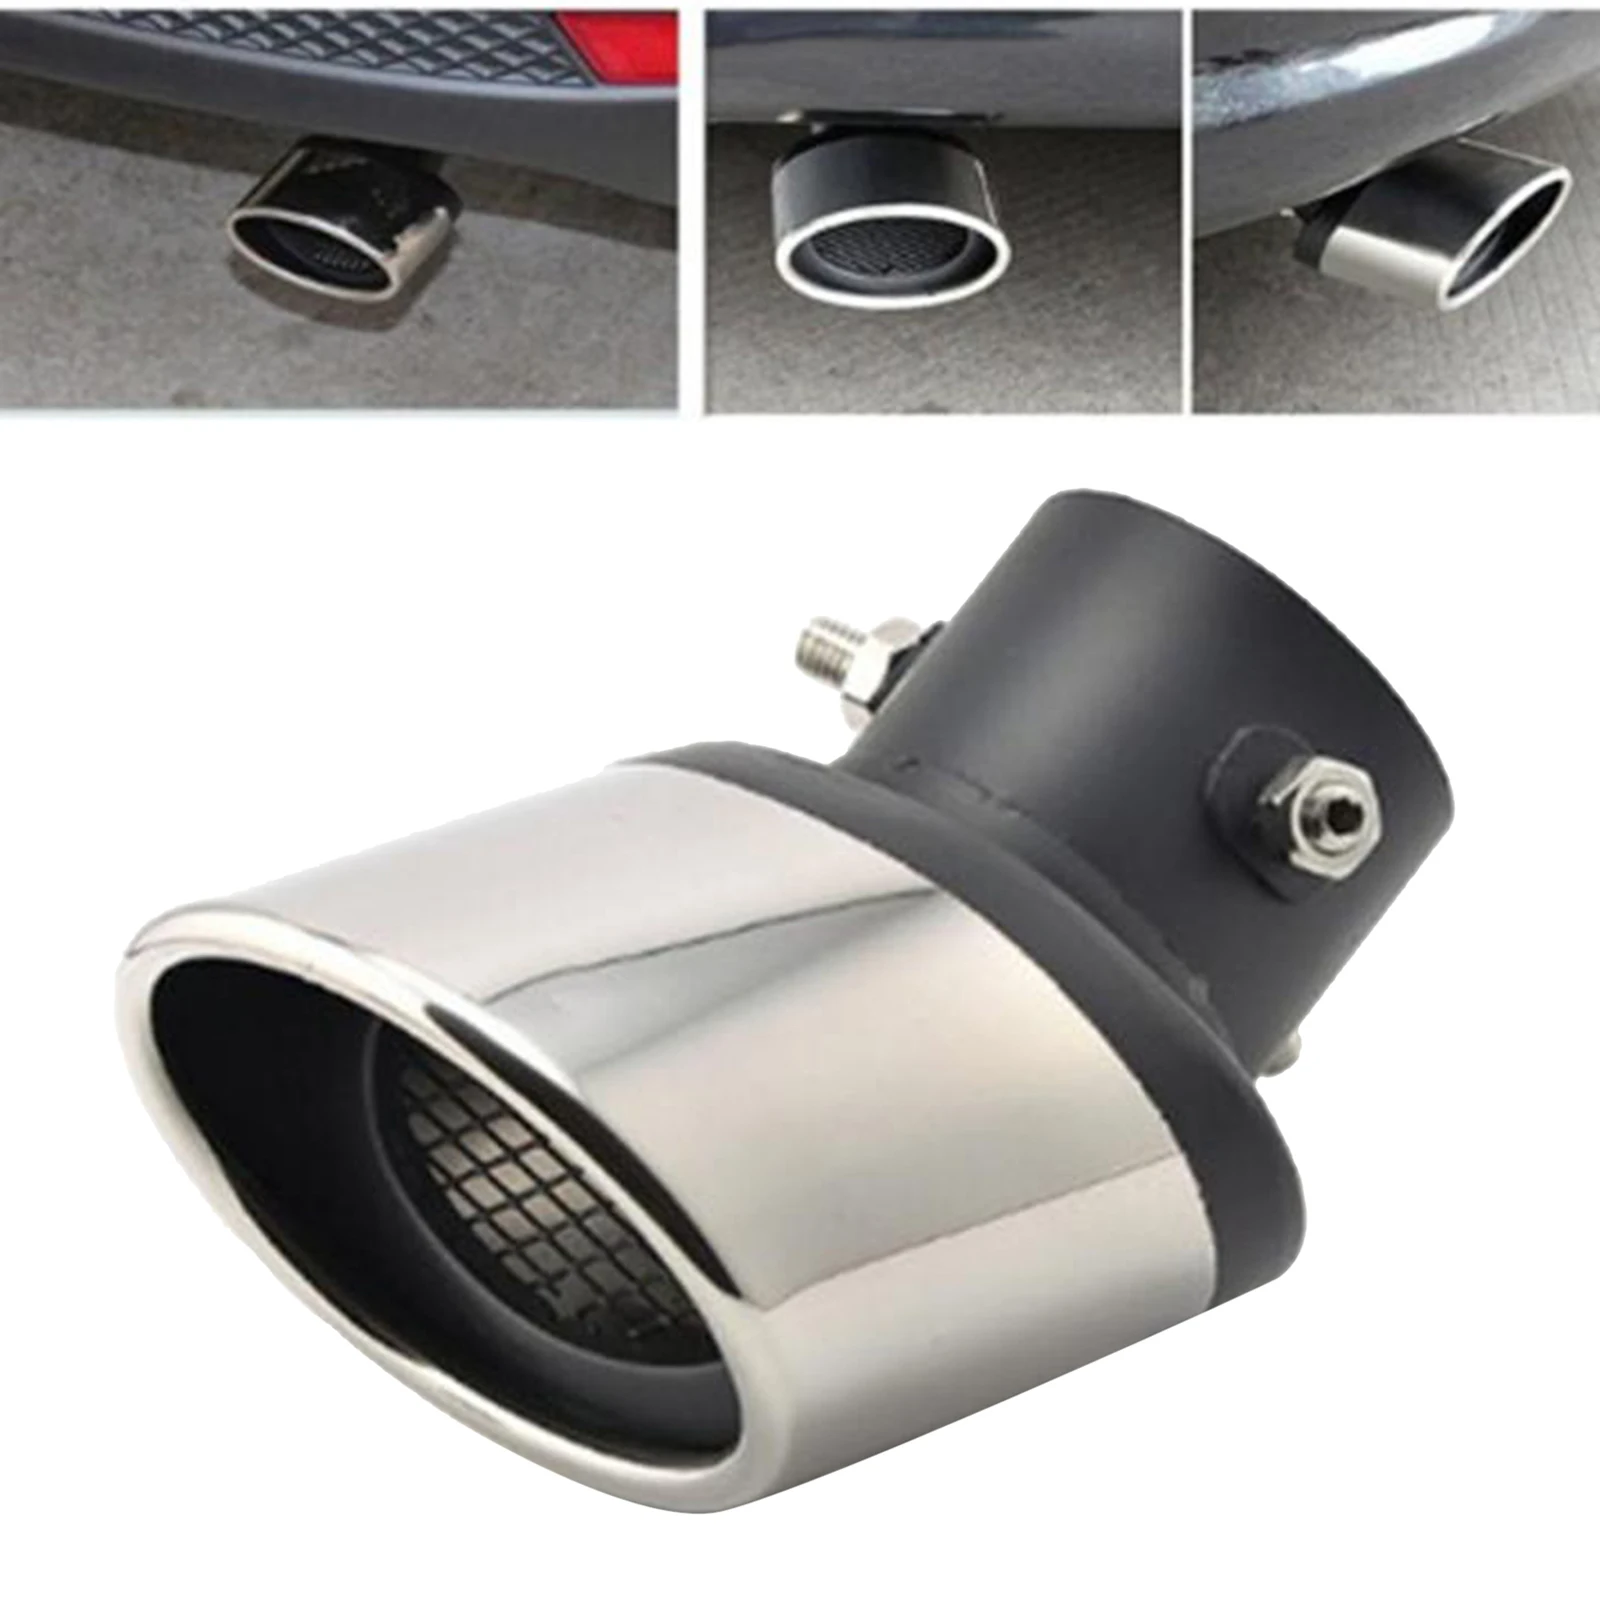 Car Muffler Exhaust Tail Pipe End Trim Tip for Mazda 5 6, Cruze